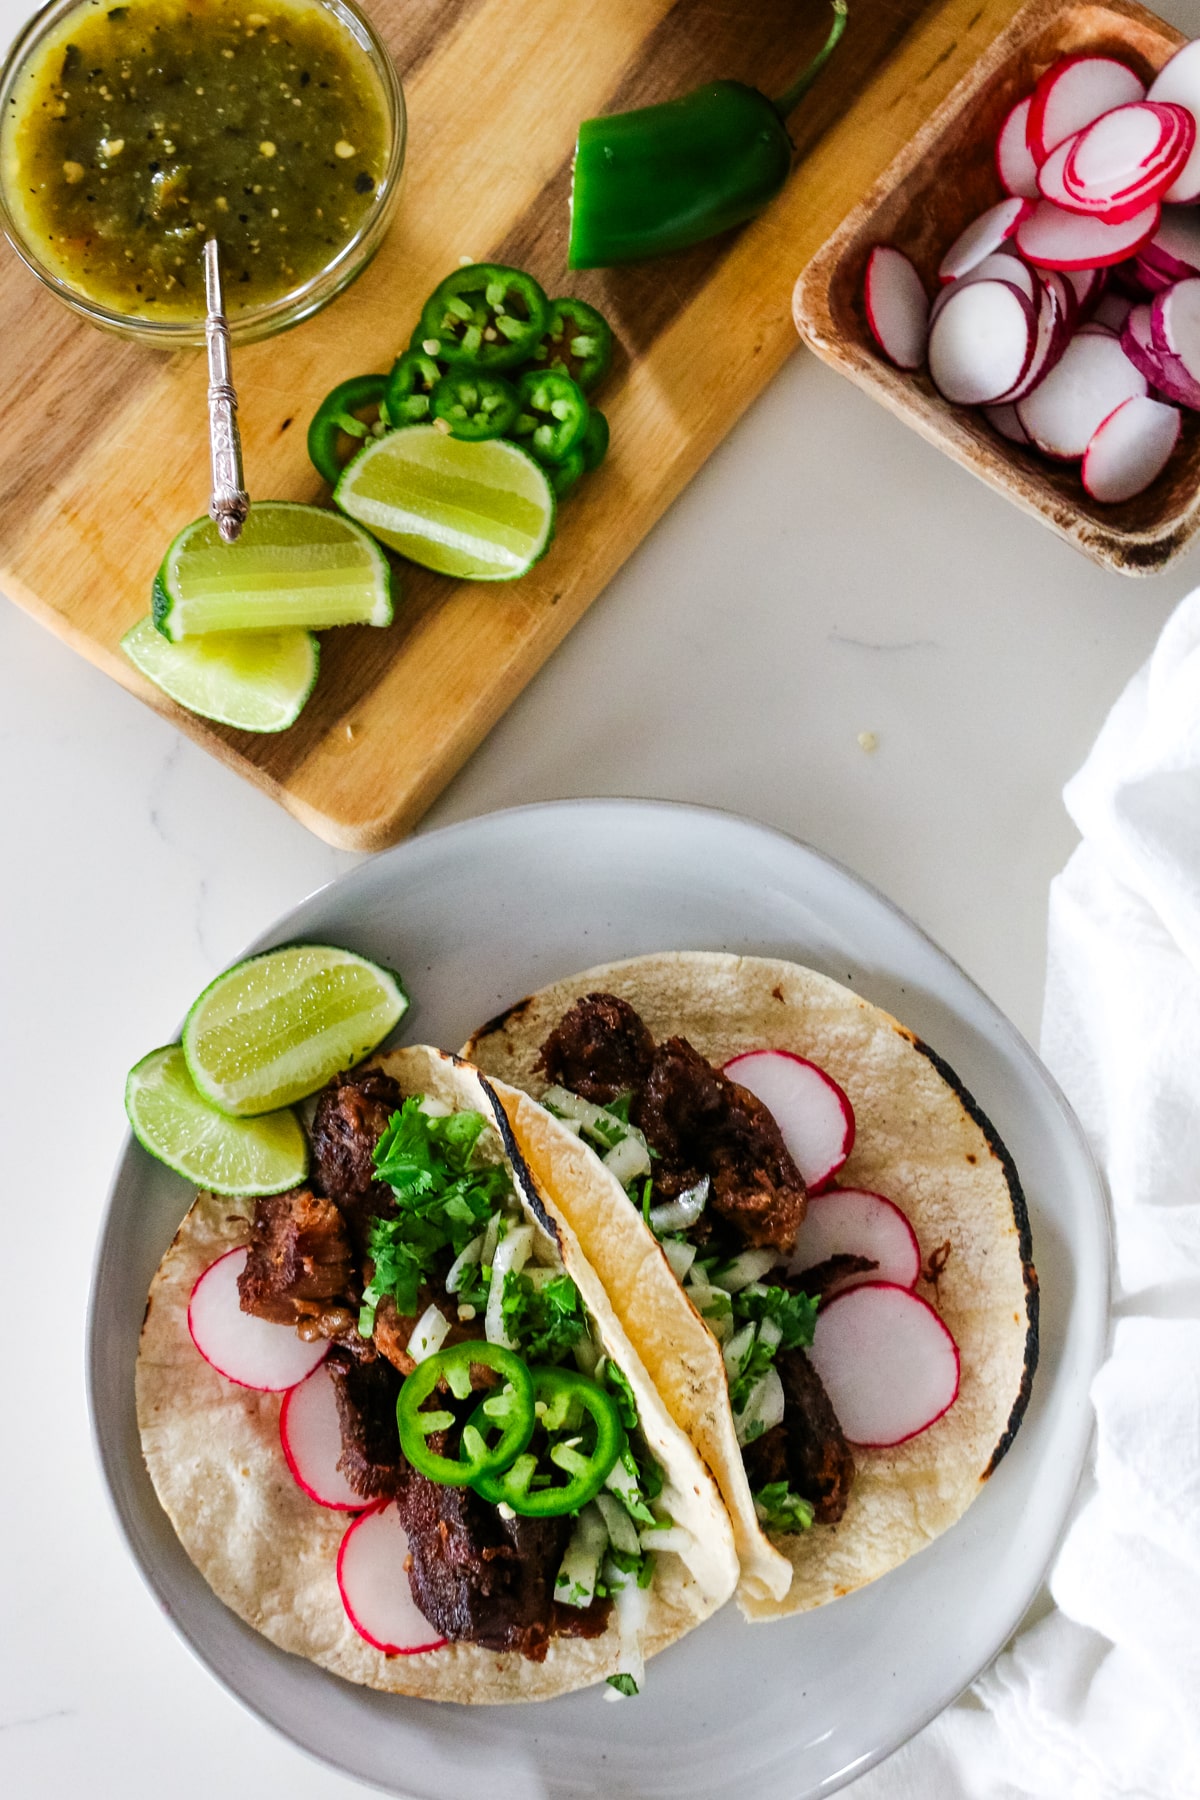 Two cow tongue tacos on white platter next to lime and cutting board with ingredients.